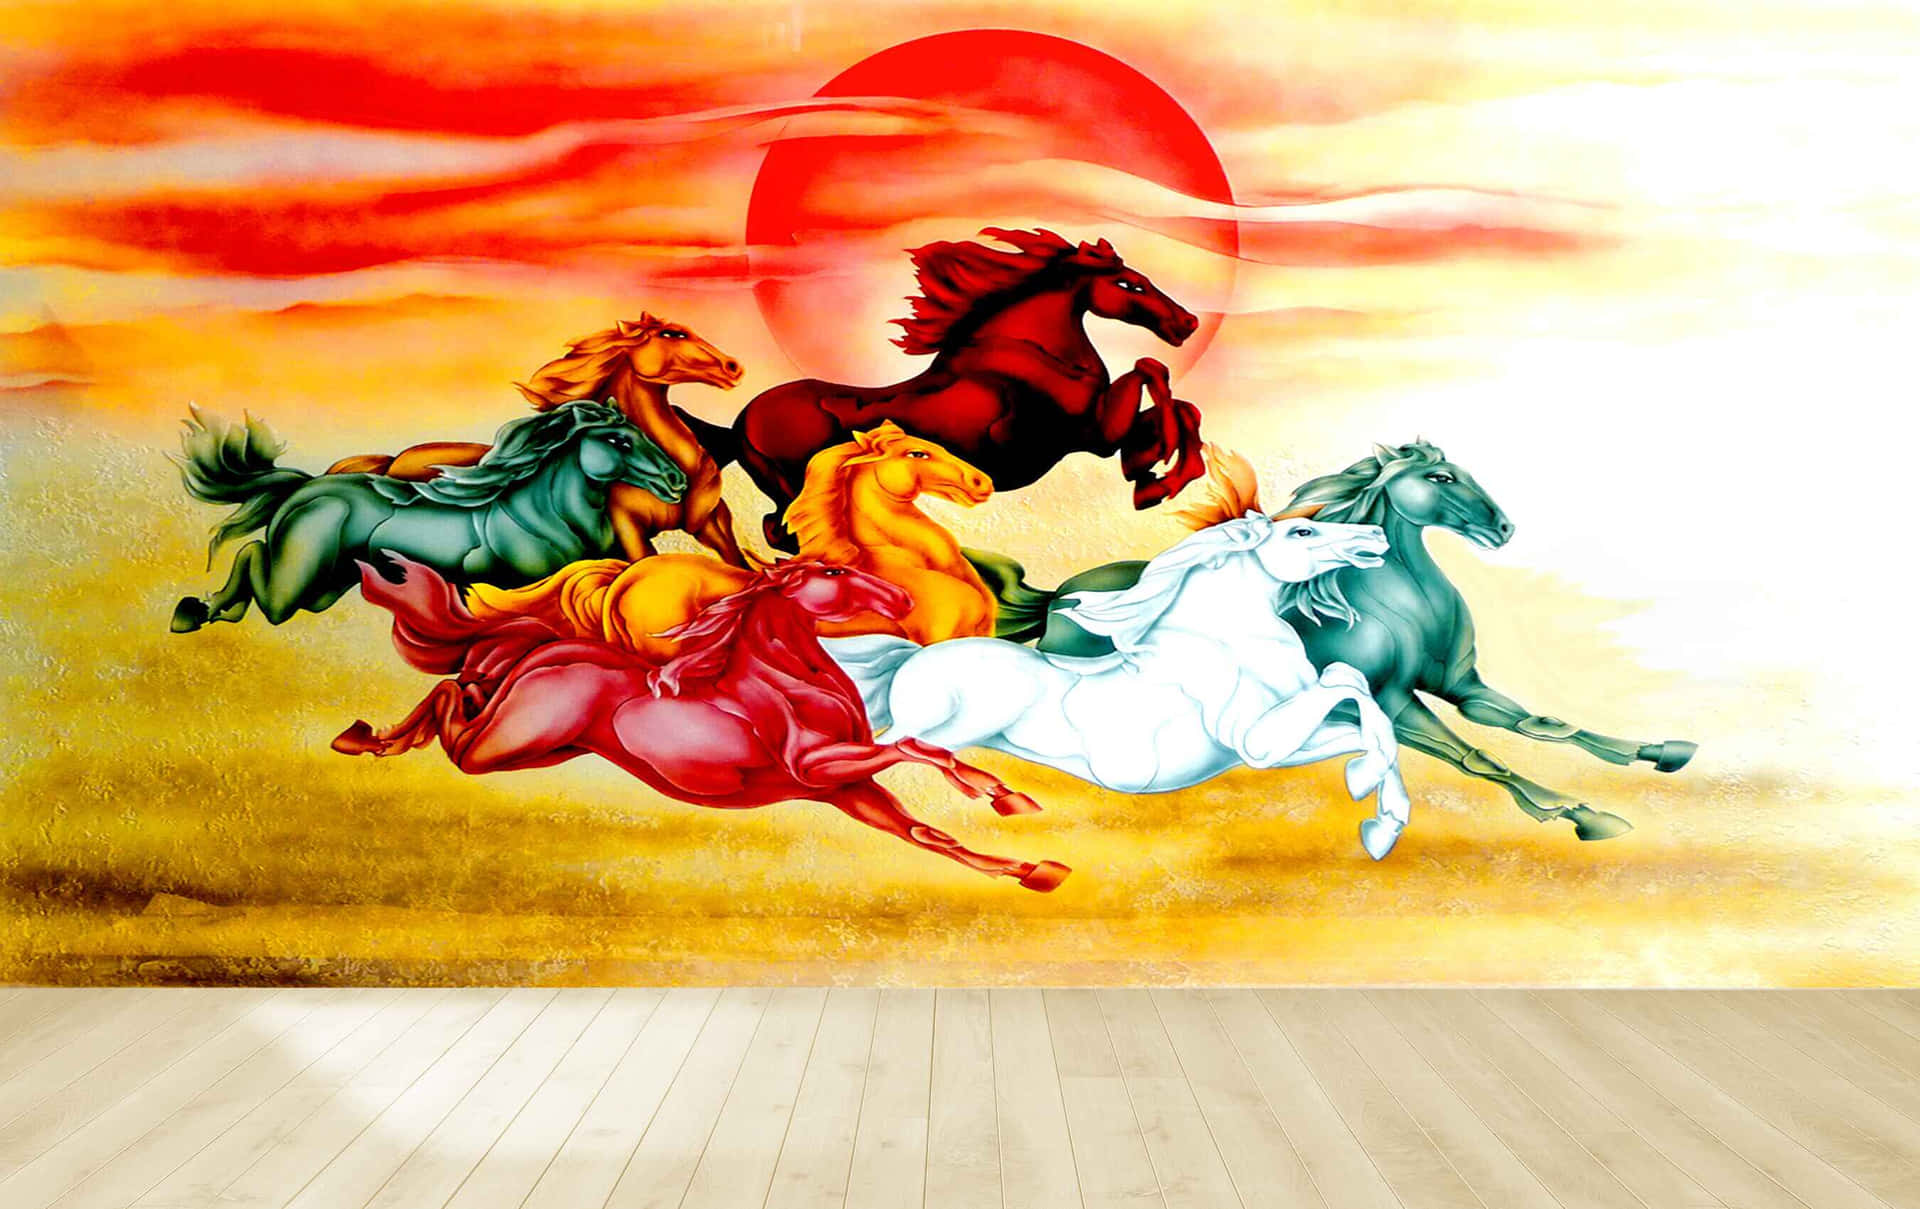 7 Horses Galloping Against Red Sun Background